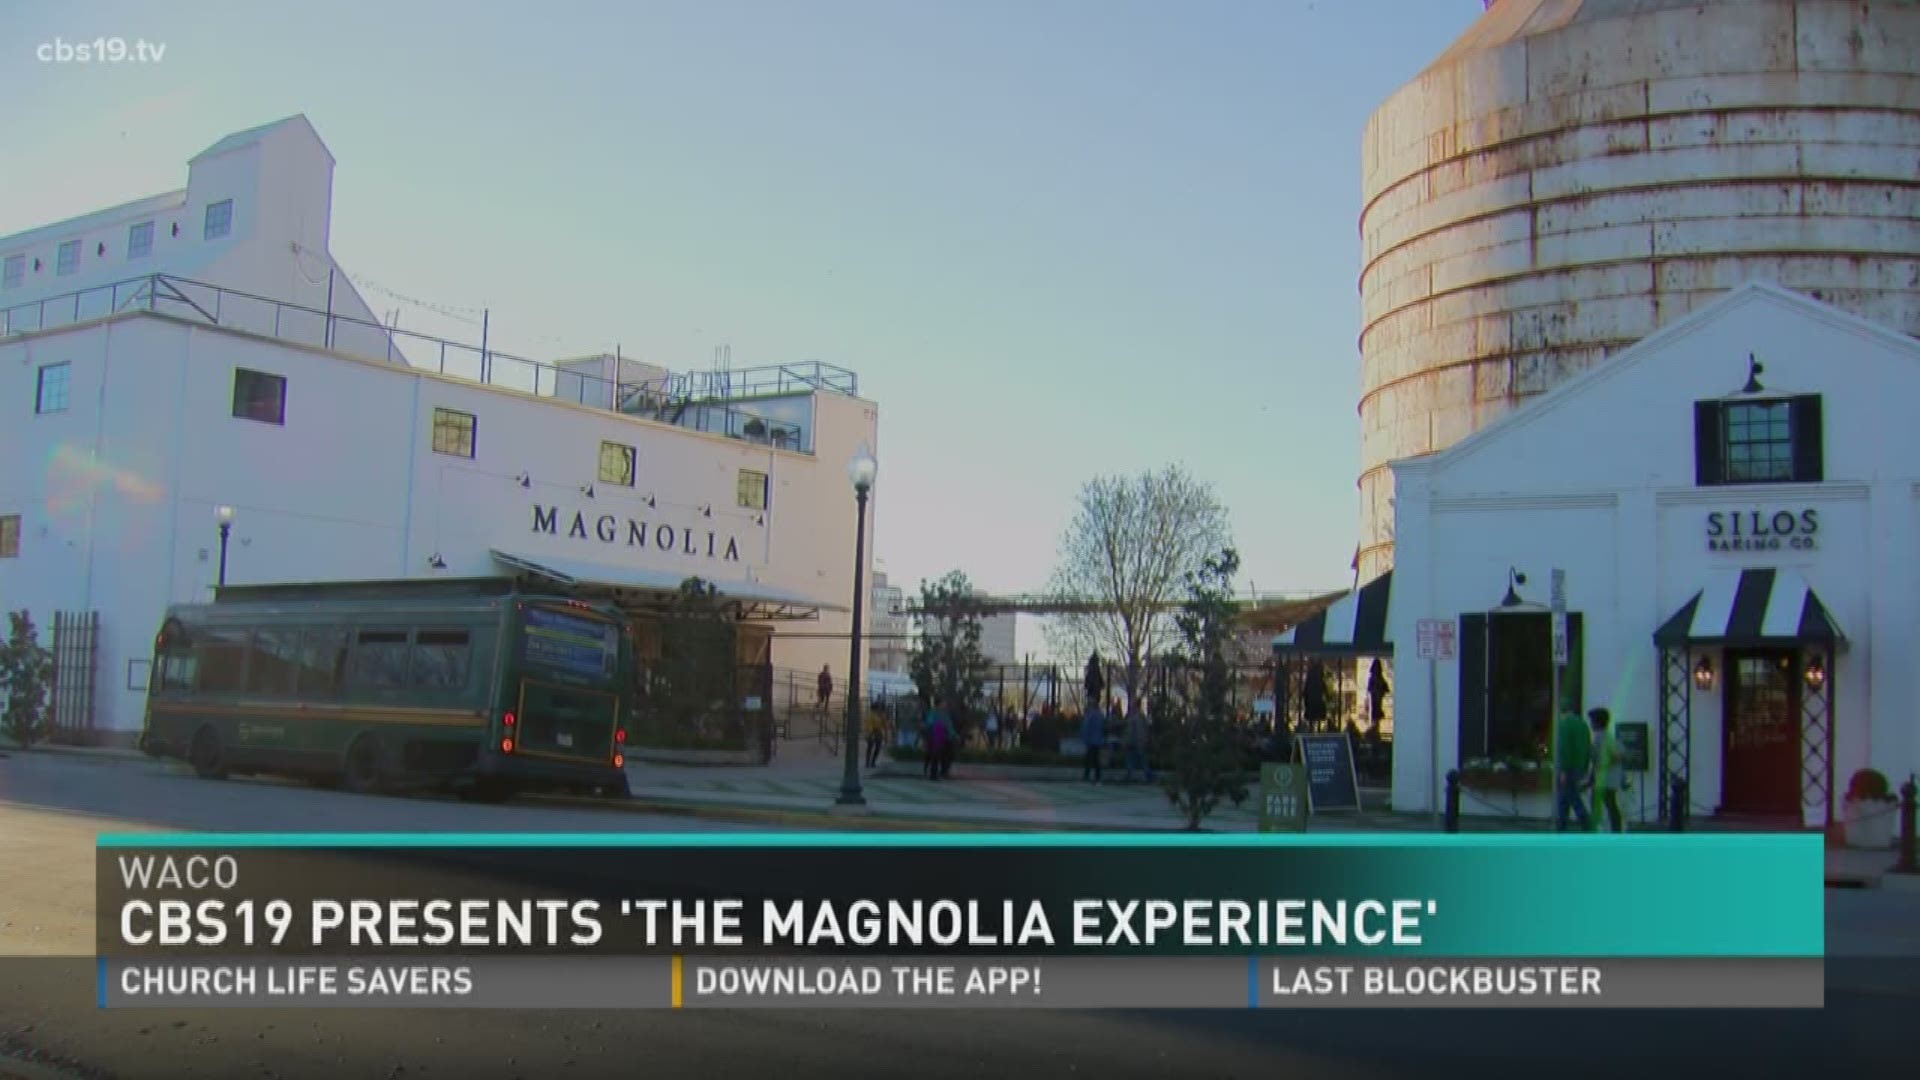 Tashara Travels to Waco for the Magnolia Experience that's available for a lucky CBS 19 fan!